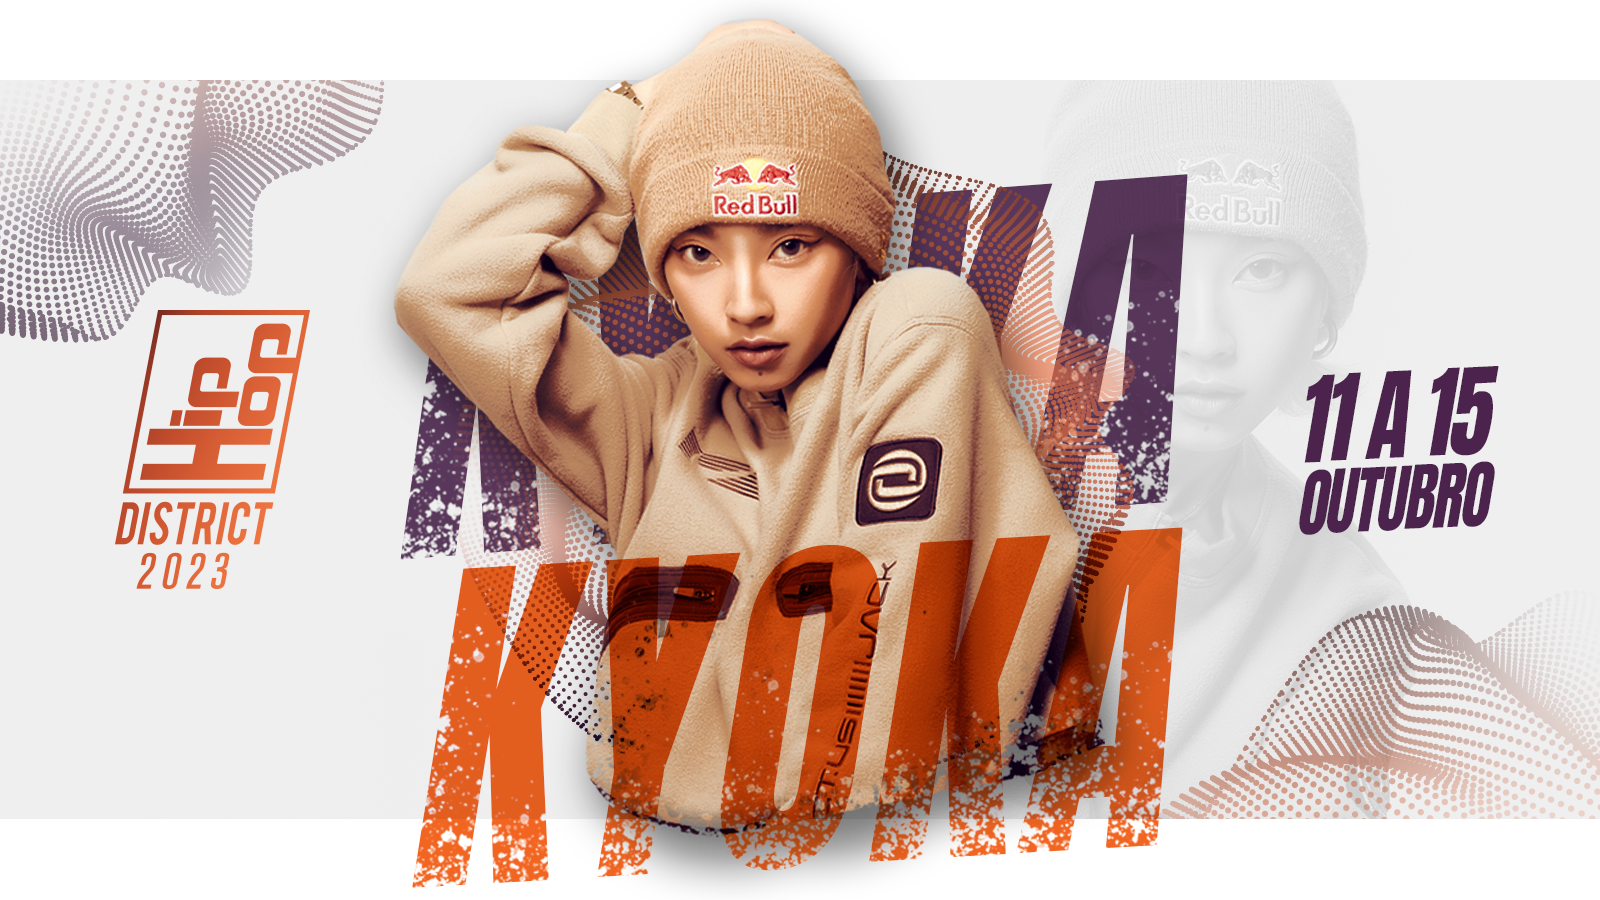 This image features the artist Kyoka, along with the Hip Hop District logo and the event date.